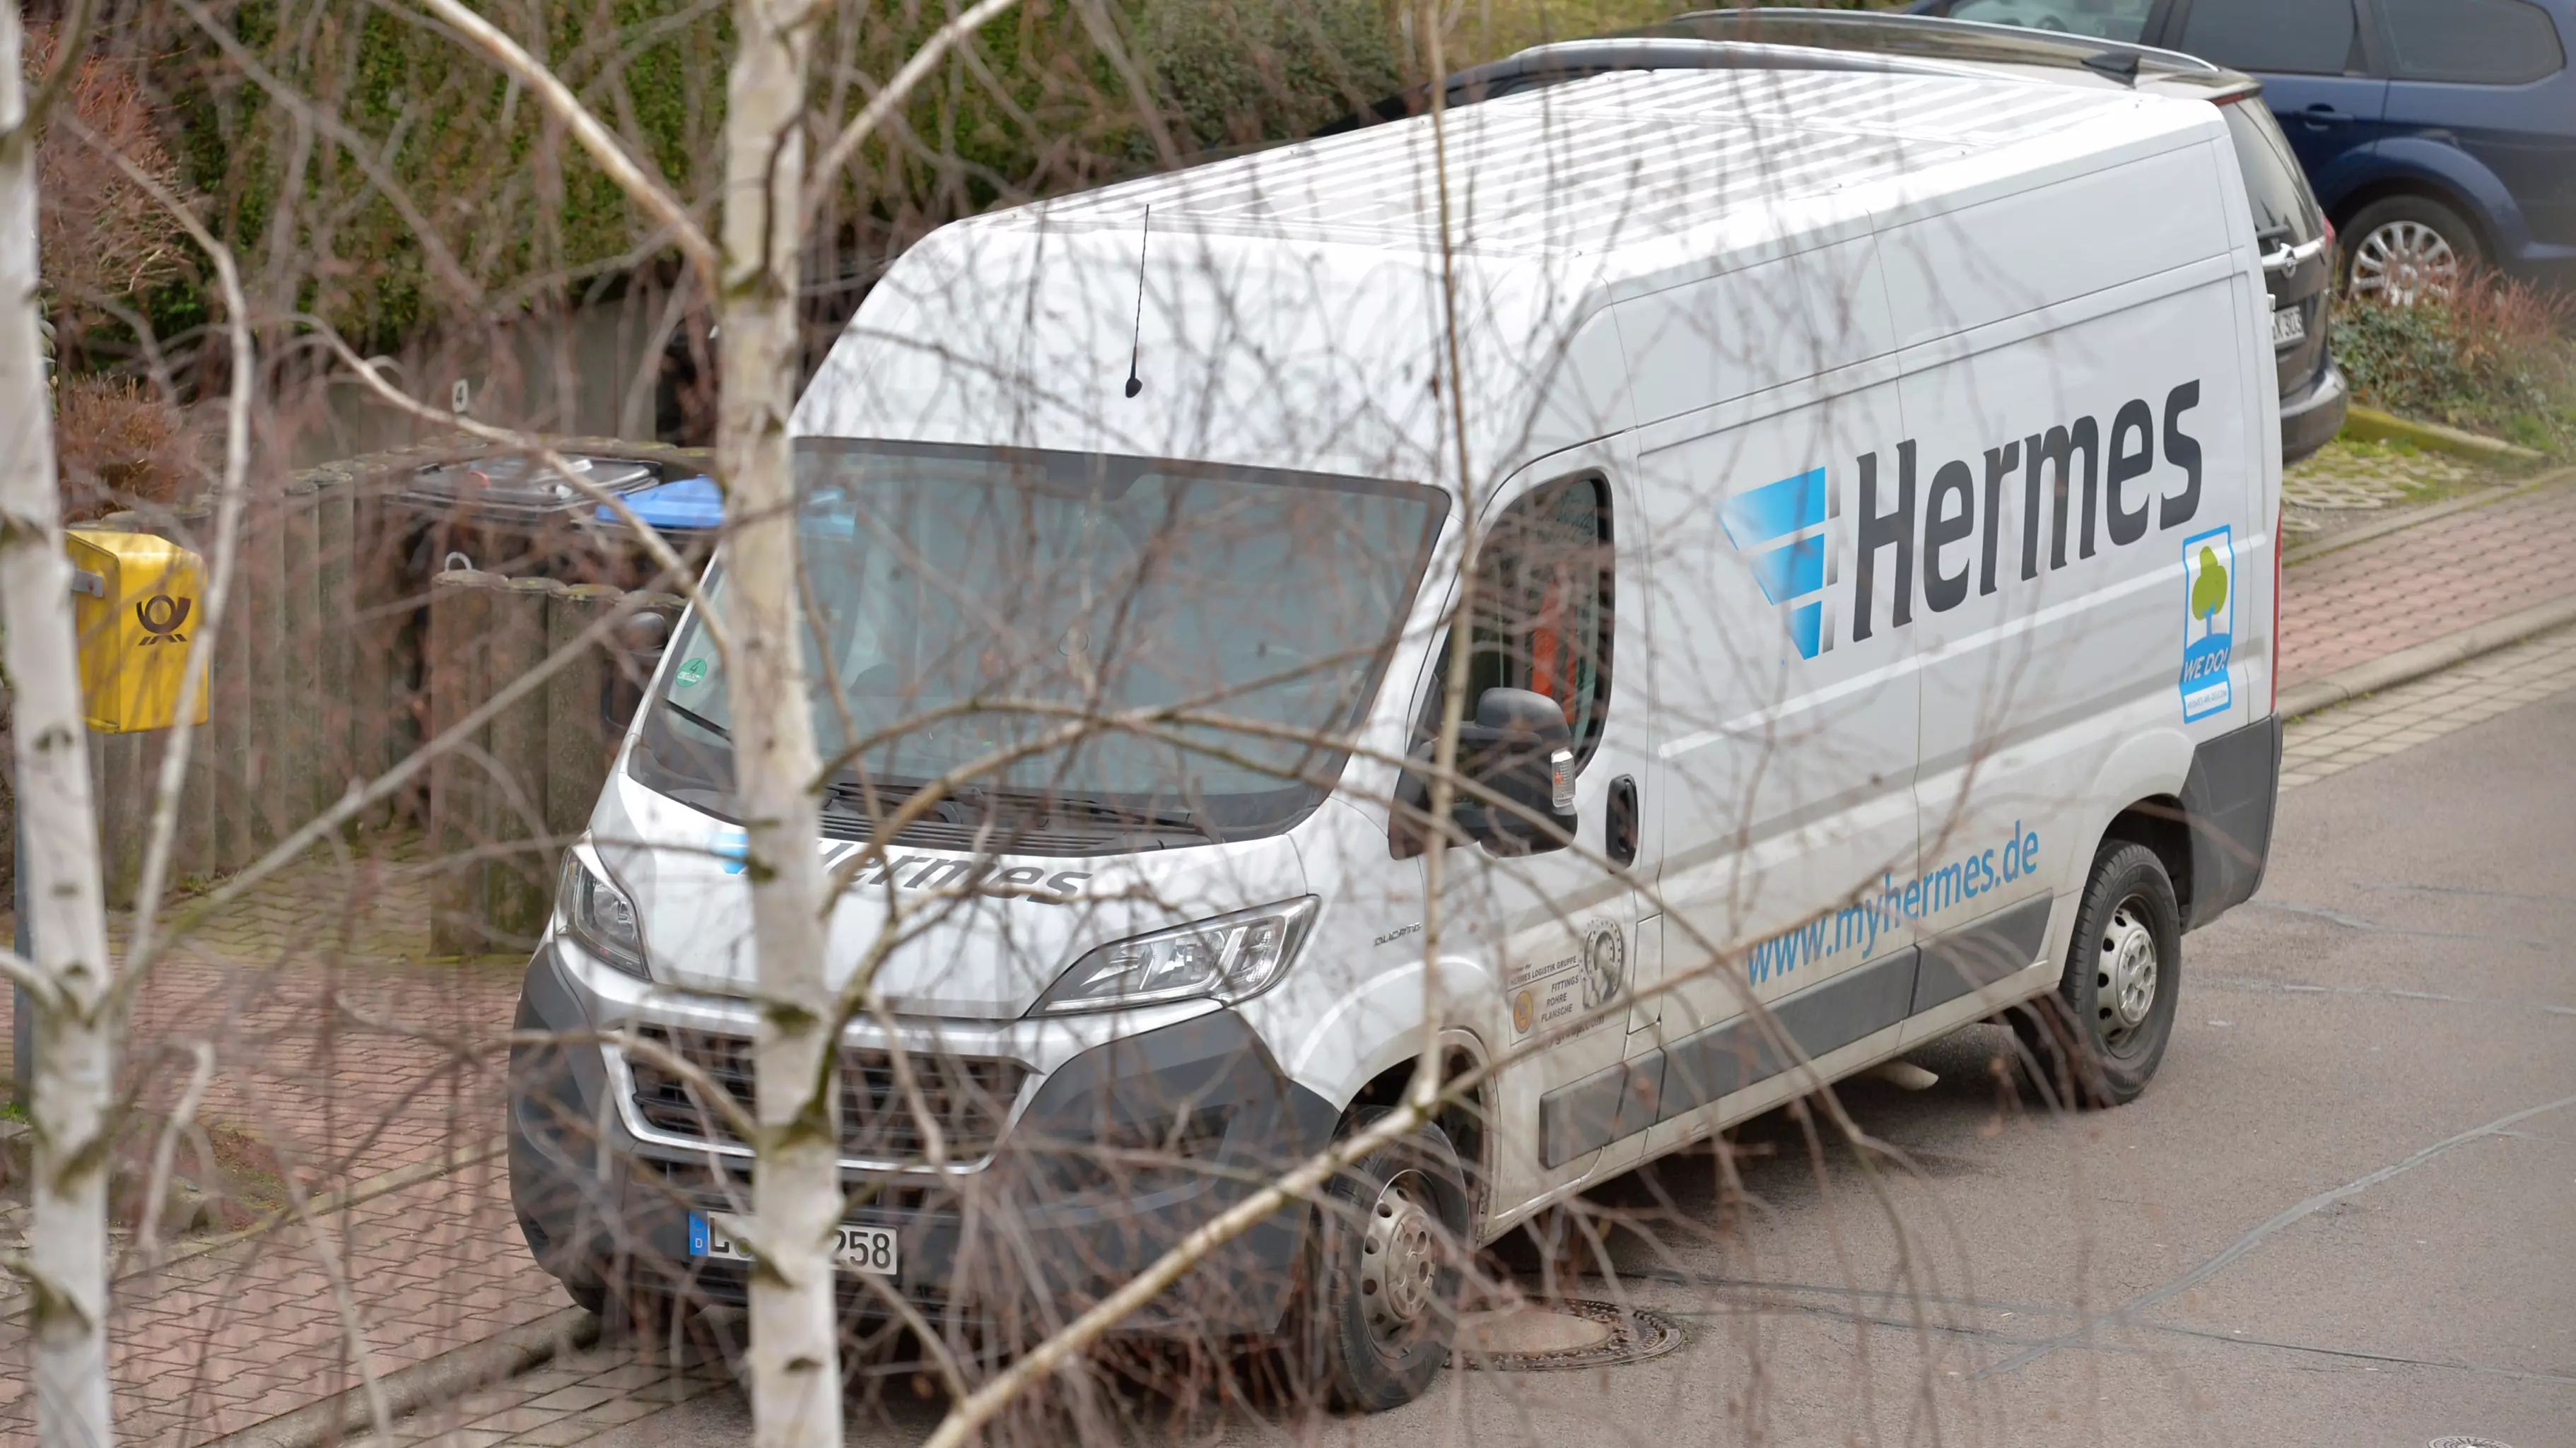 Hermes 'Lost' Thousands Of Parcels Due To Machine Misreading Postcodes